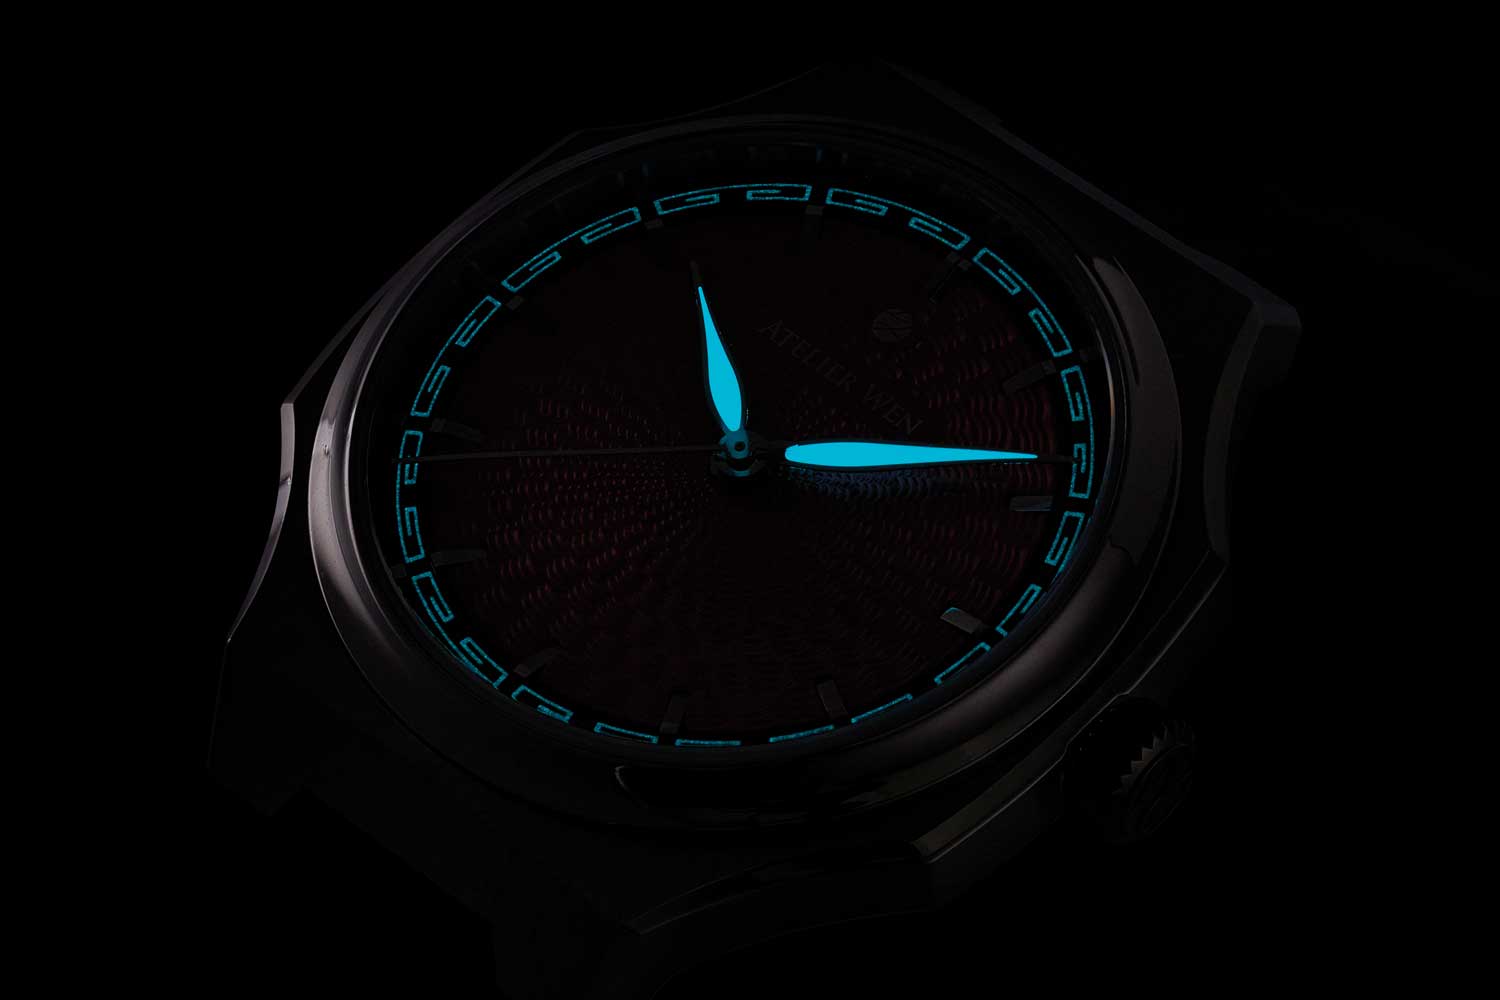 A subtle reference to the watch’s Chinese inspirations that show up in the dark